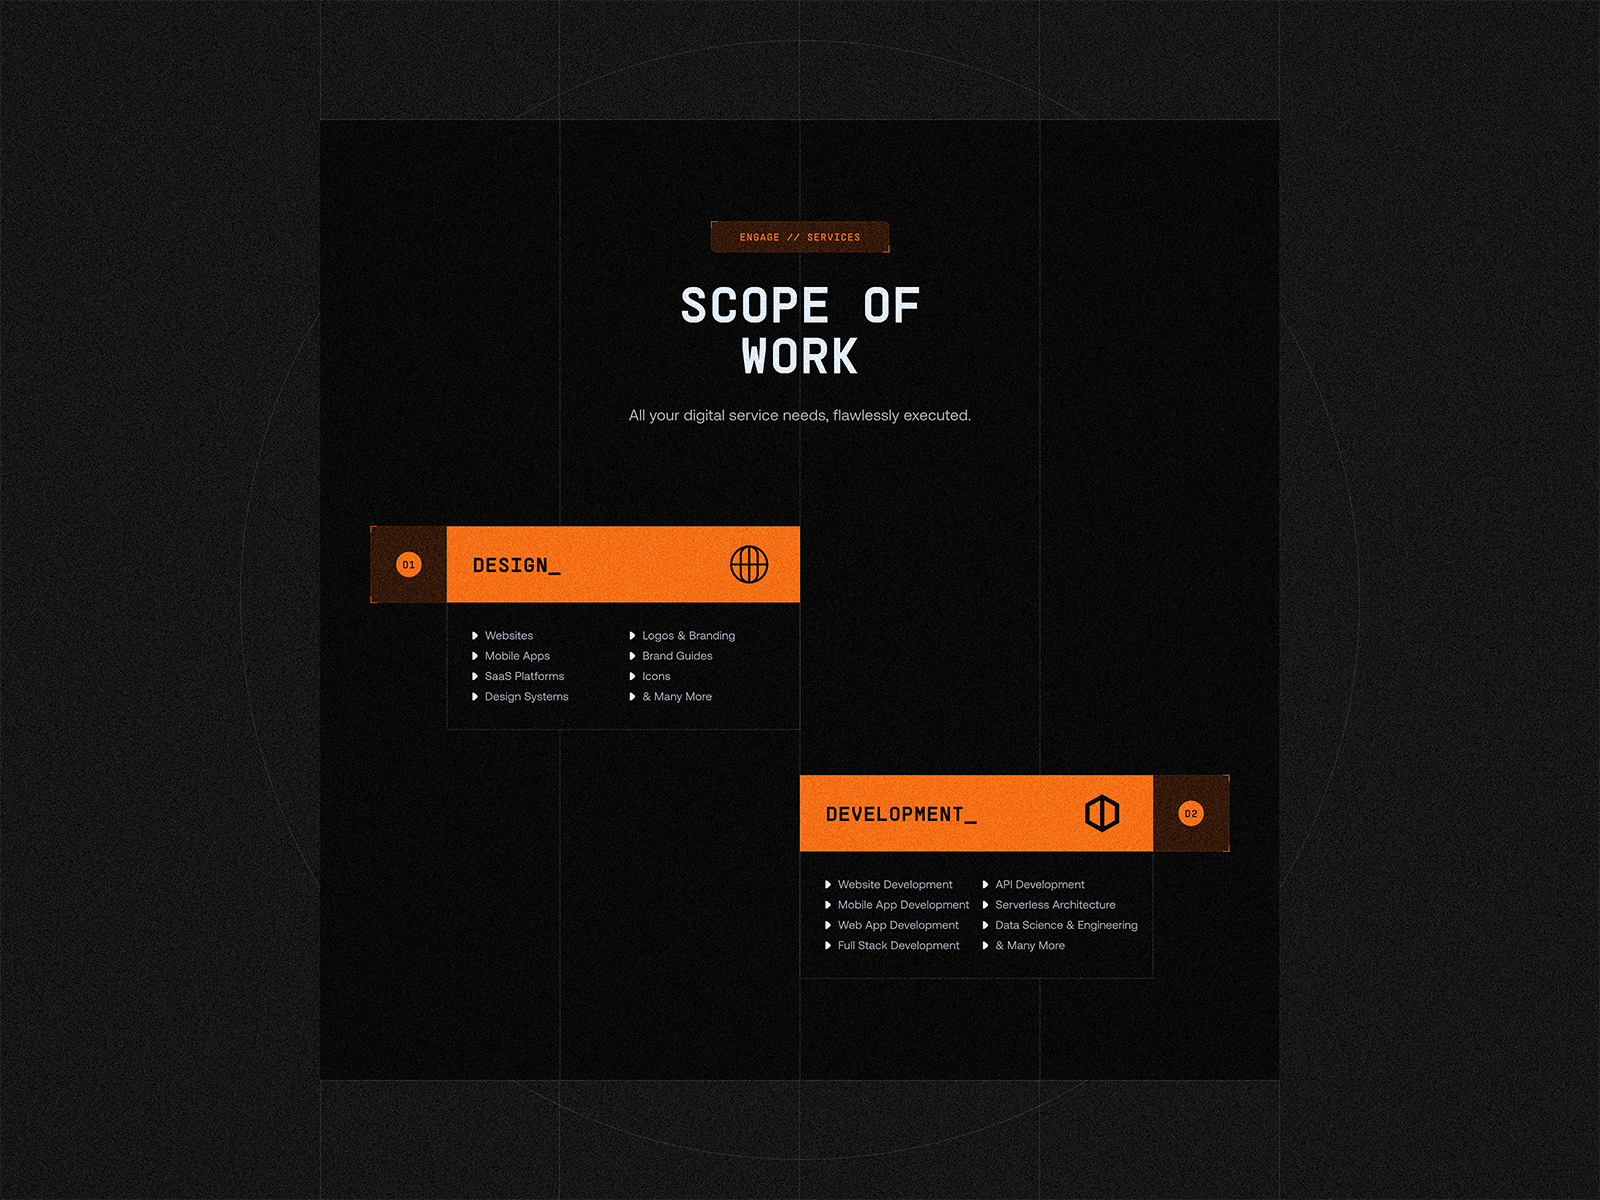 Scope of Work (Services)